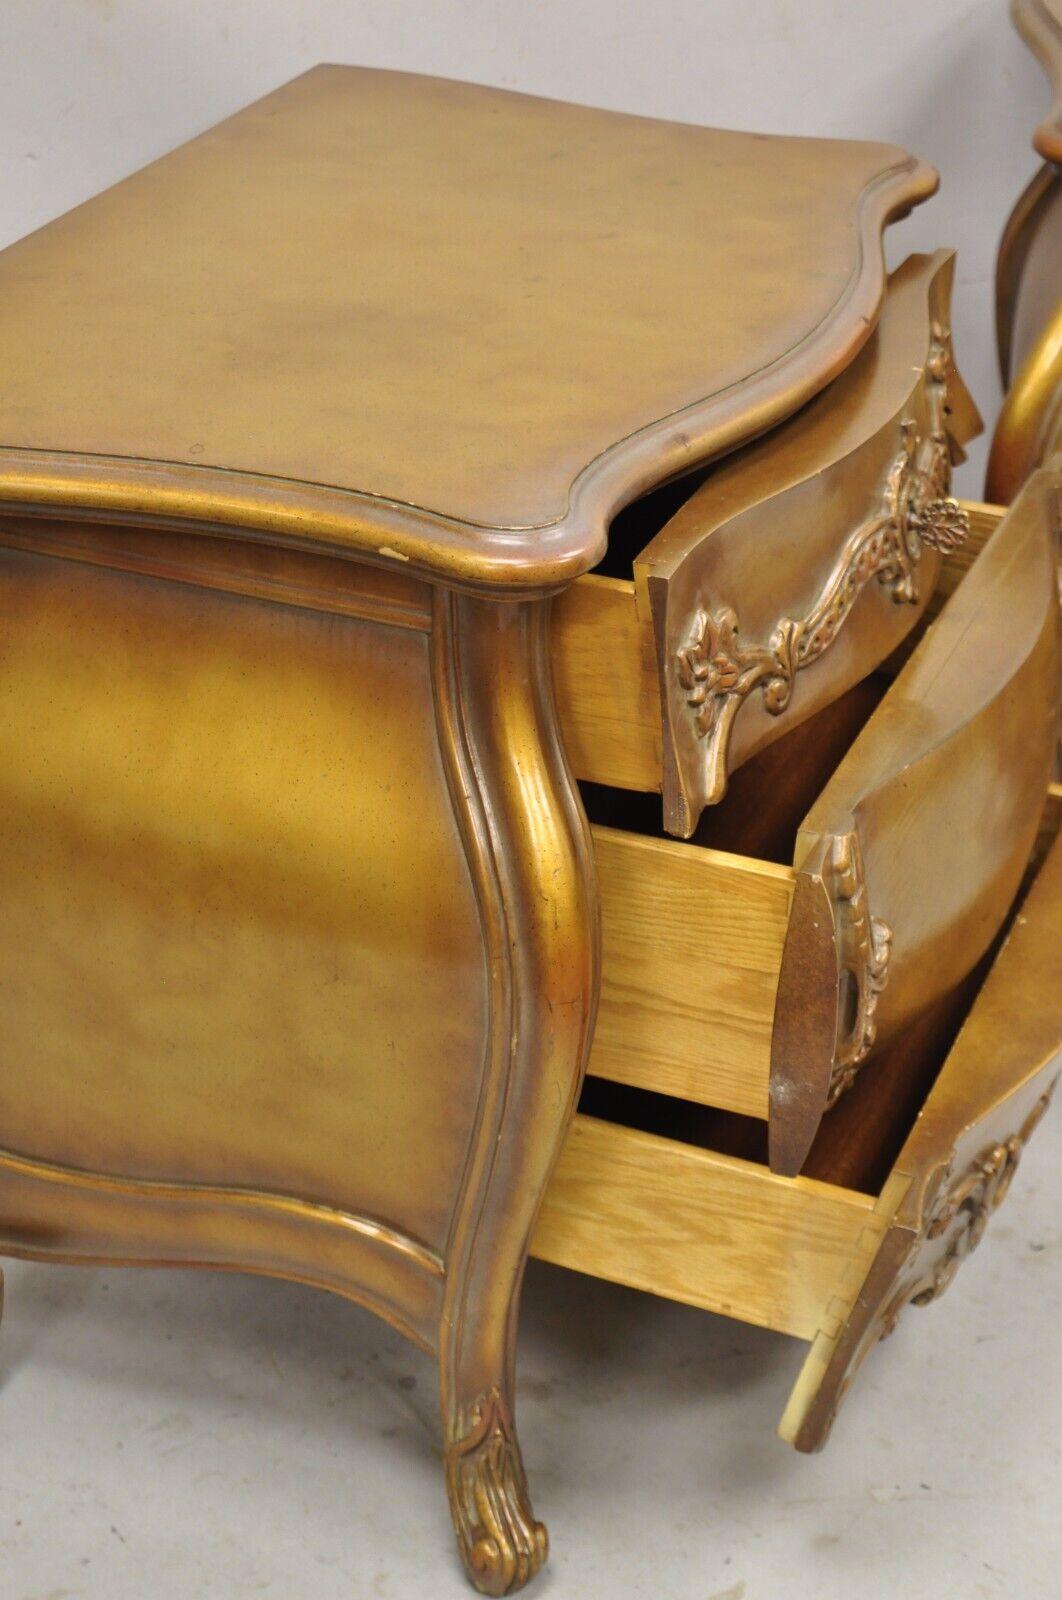 Vintage French Rococo Baroque Style Gold Gilt Bombe Nightstands - a Pair In Good Condition For Sale In Philadelphia, PA